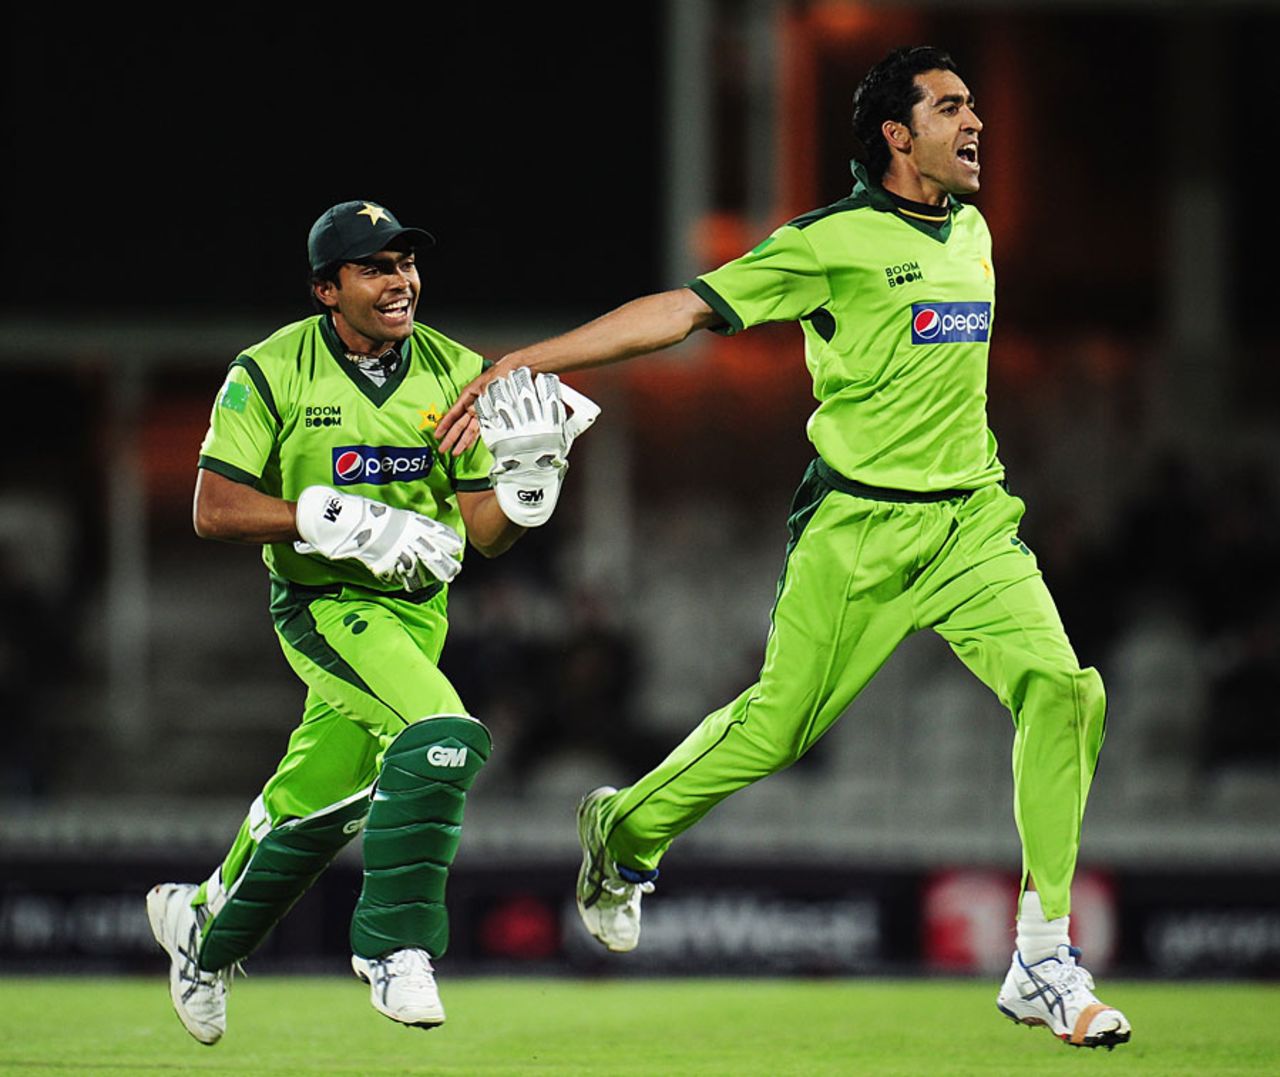 Umar Gul races off in celebration as he takes another wicket, England v Pakistan, 3rd ODI, The Oval, September 17 2010